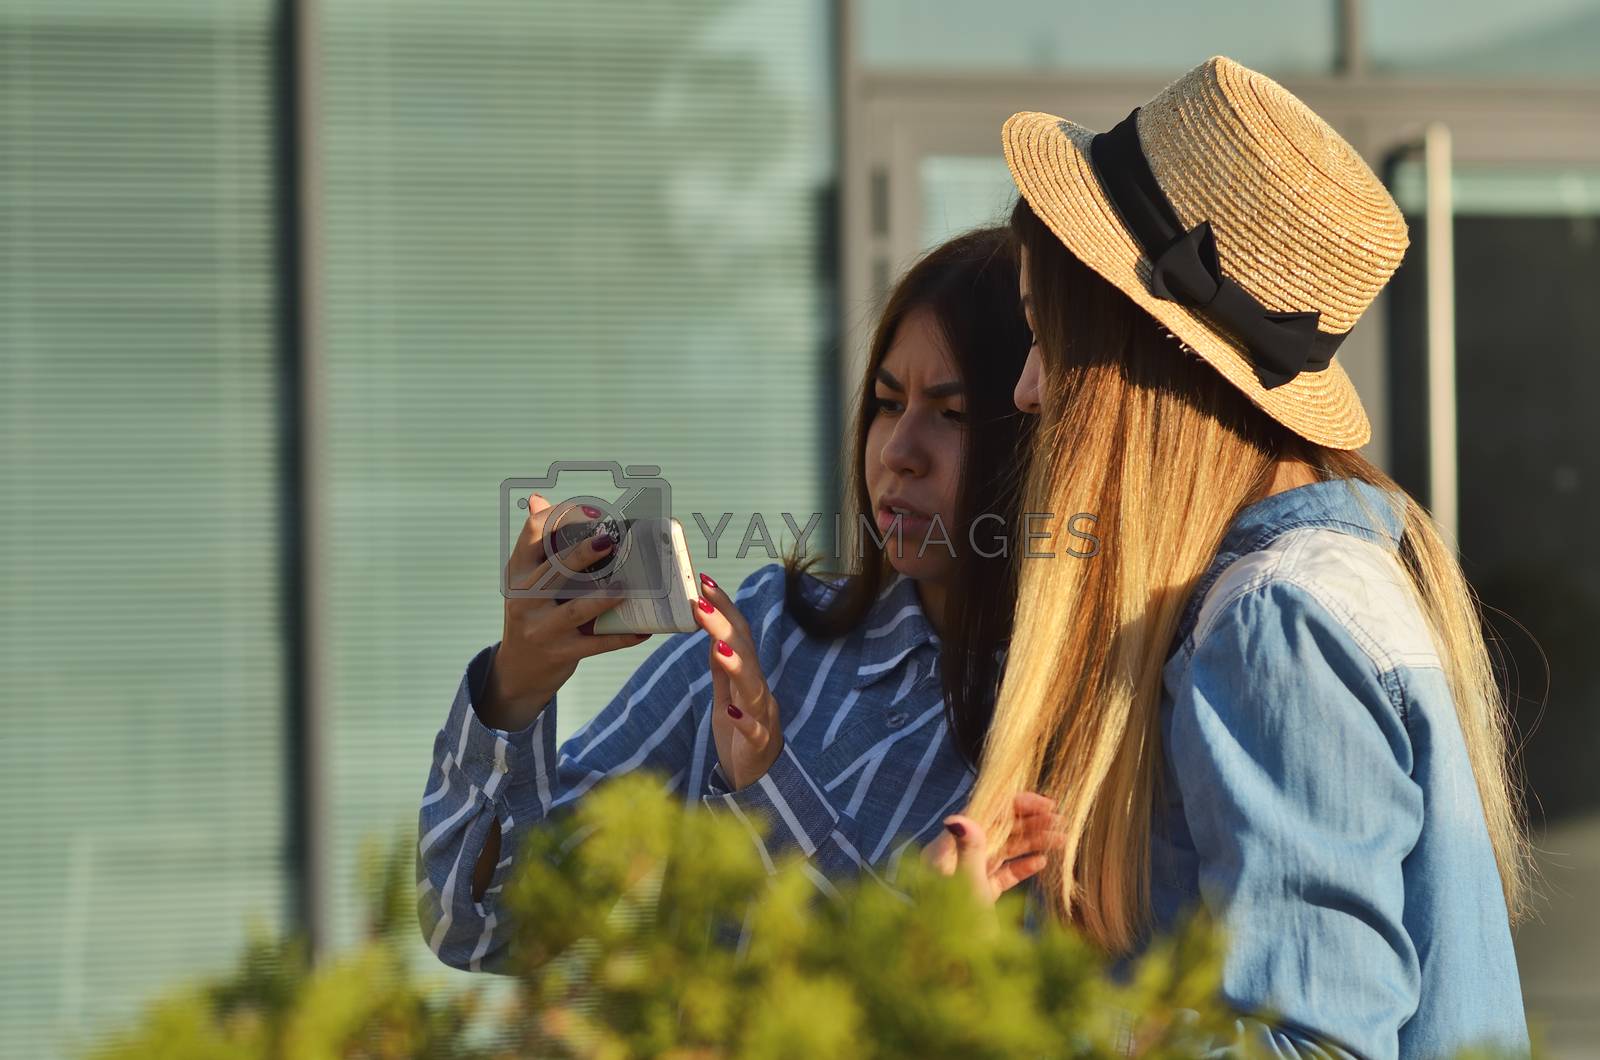 Royalty free image of Two young girls communicate in social networks by phone walking on the street on a Sunny day by xzgorik